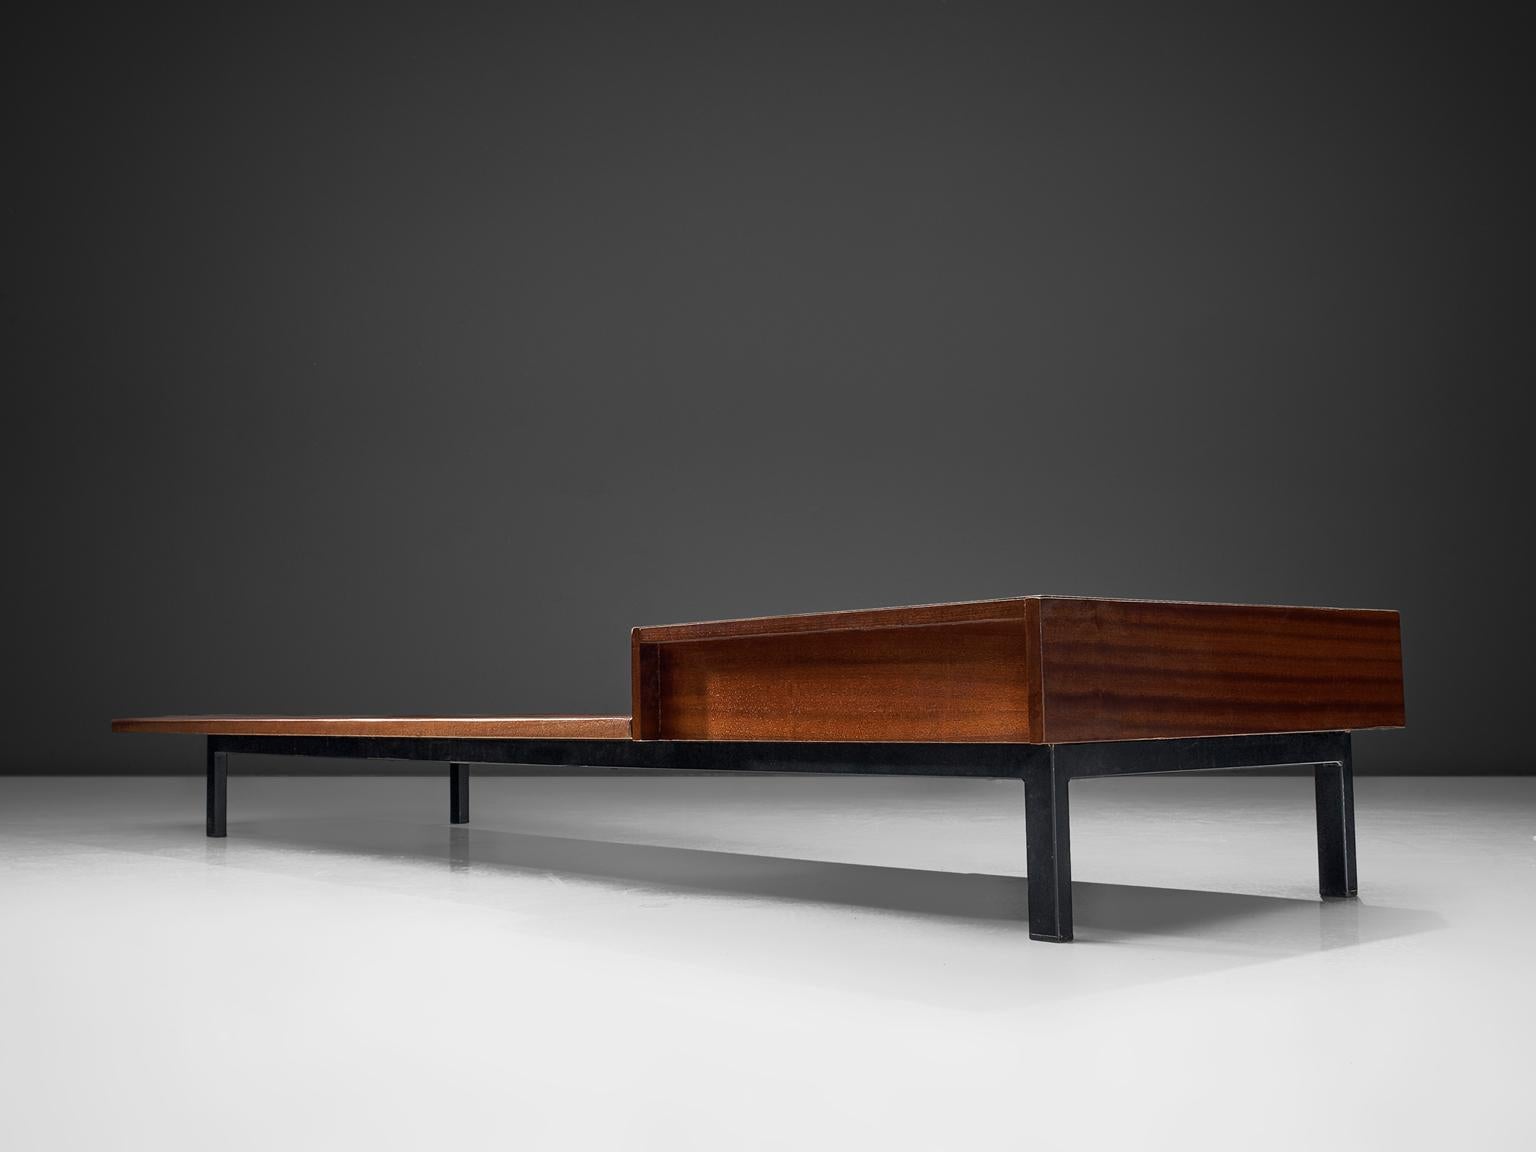 Steel Charlotte Perriand Cansado Bench for Steph Simon